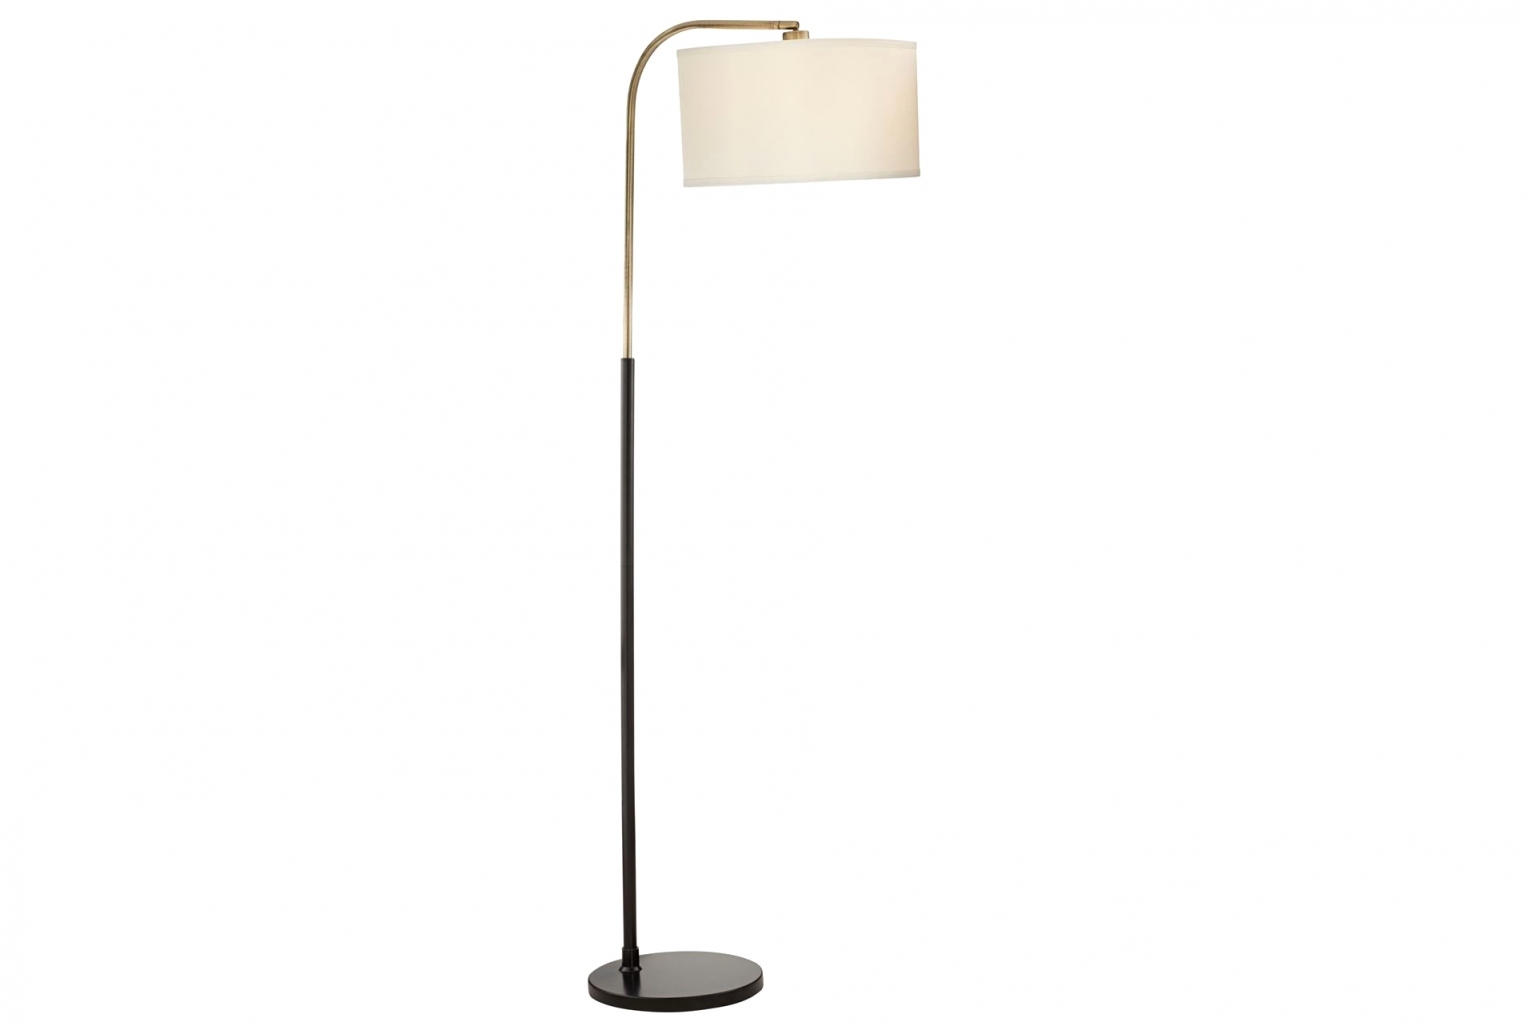 12 photos gallery of agha contemporary floor lamps